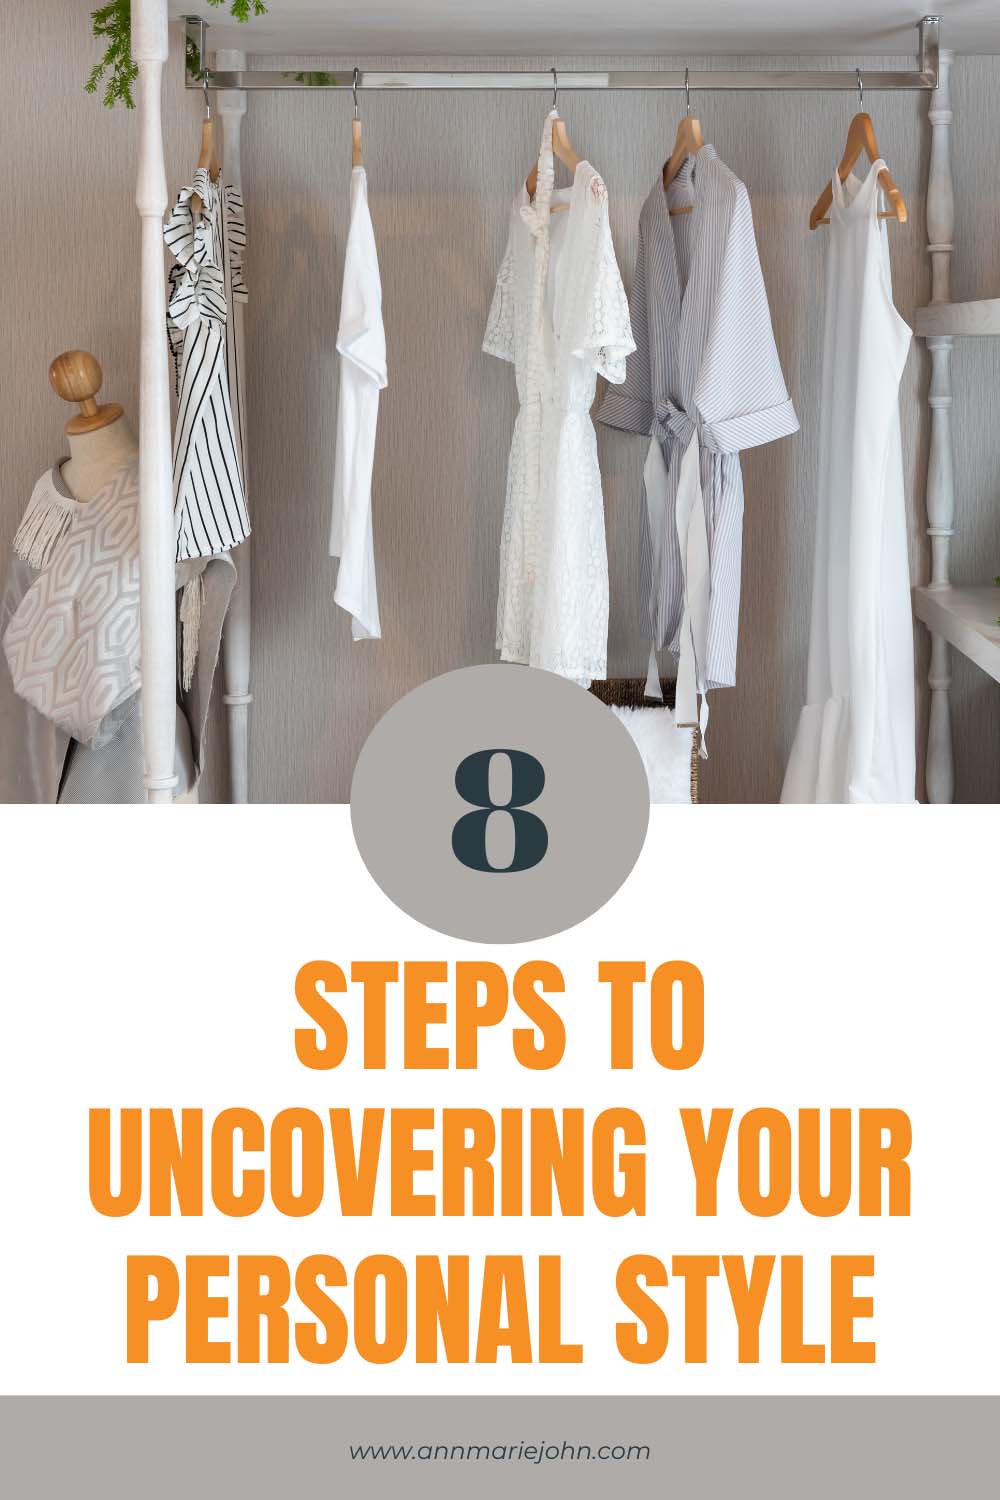 Steps to Uncovering Your Personal Style